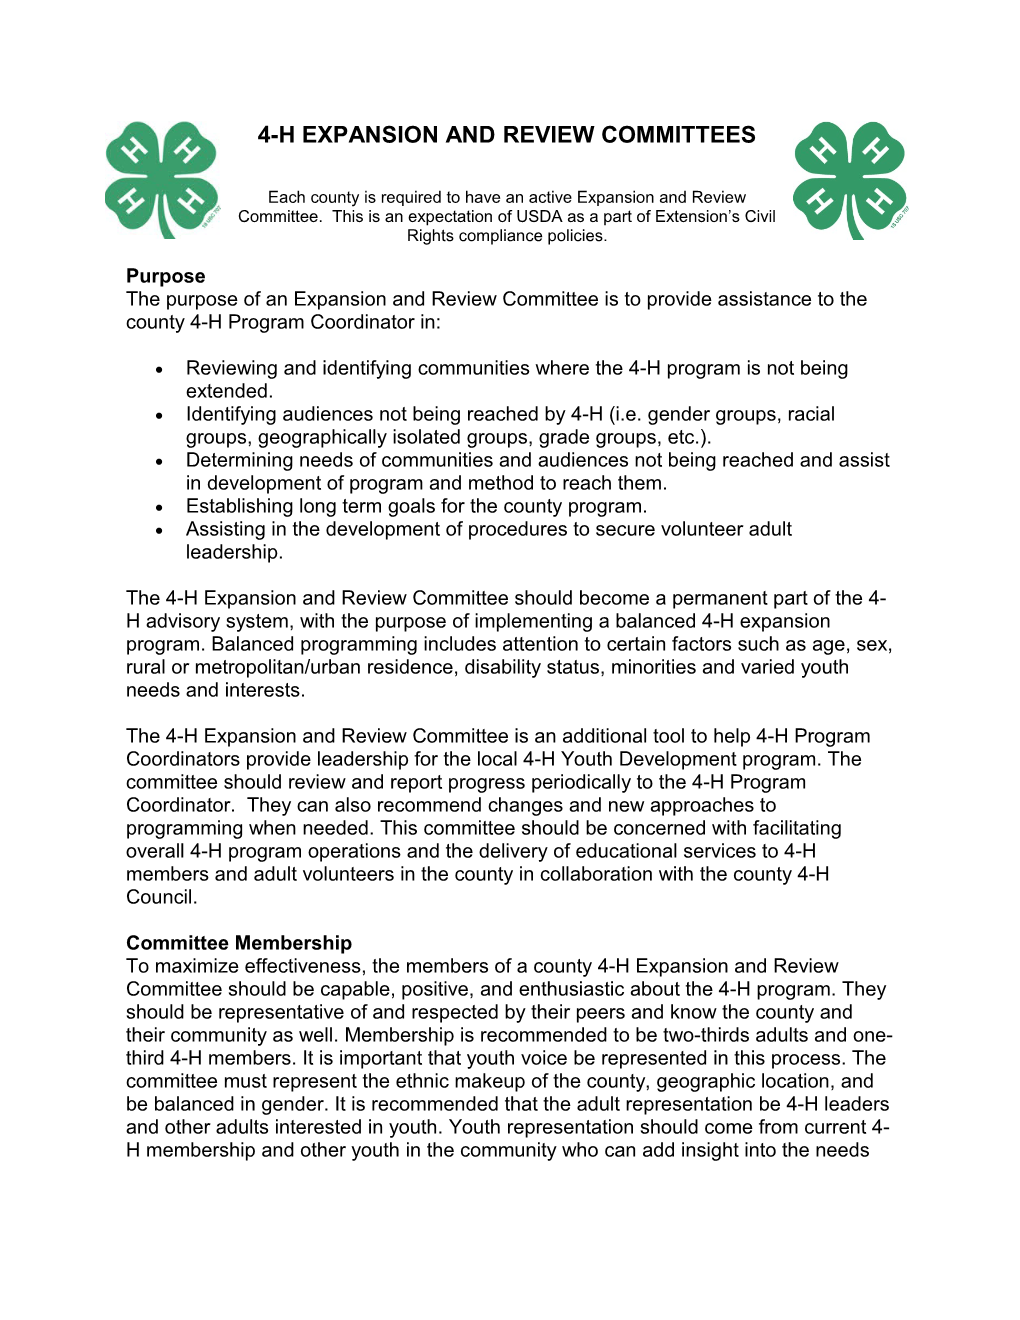 4-H Expansion and Review Committees